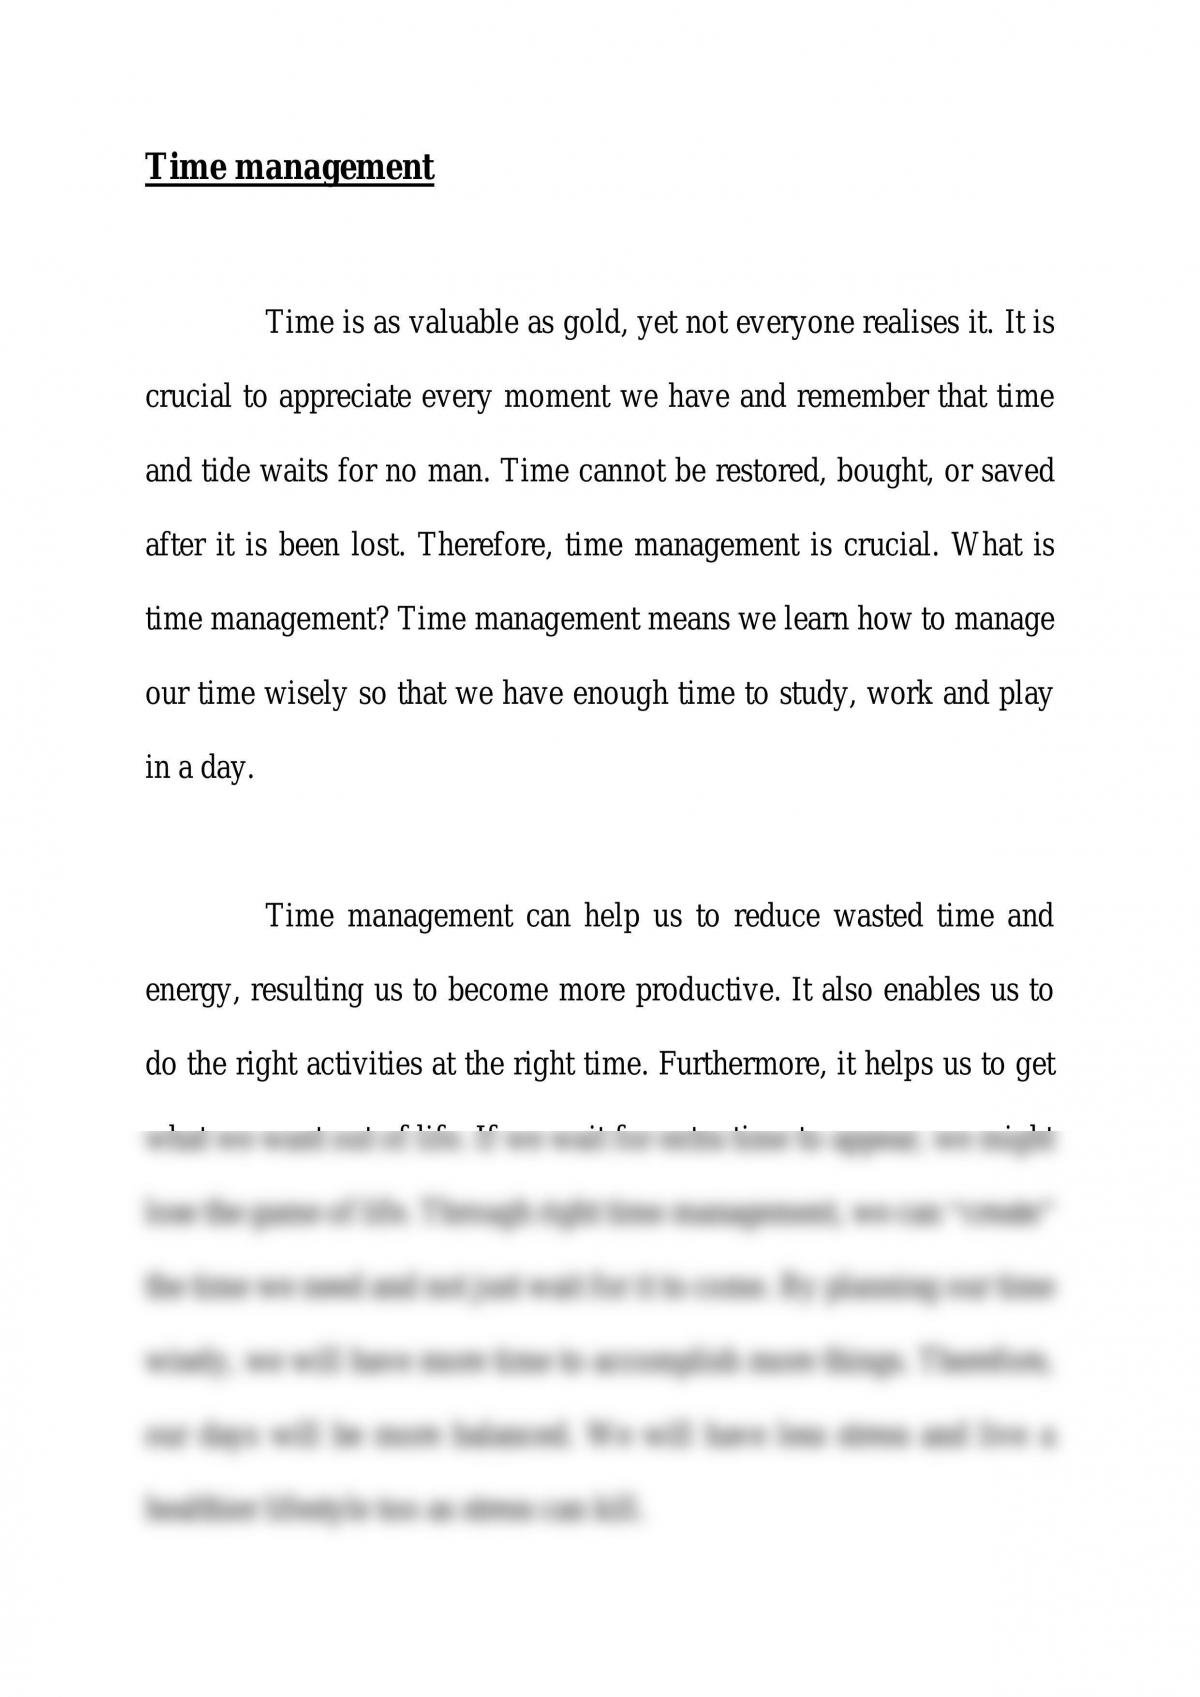 time management meaning essay